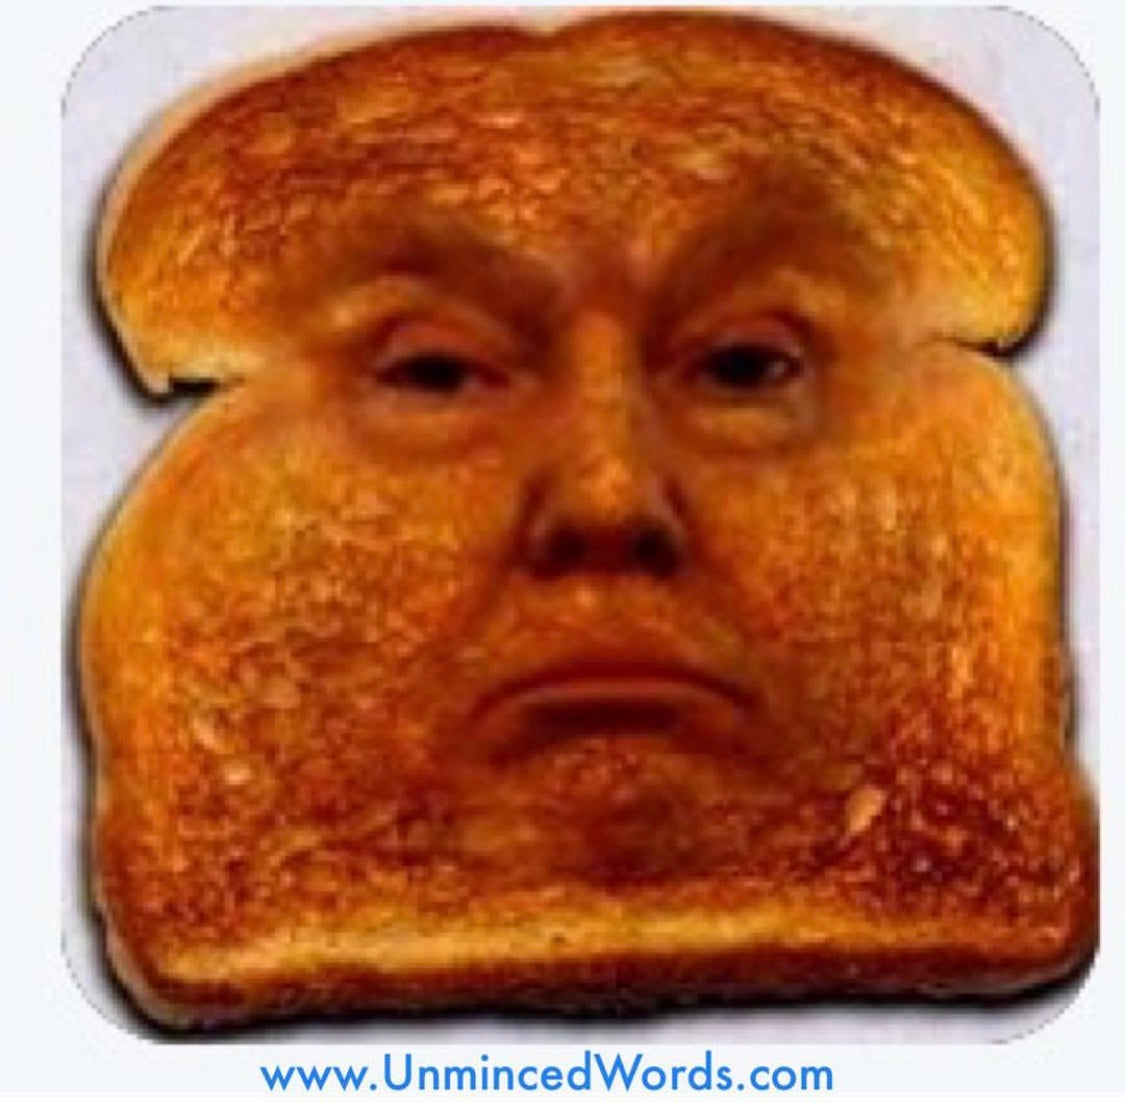 Some Think Trump Might Soon Be Toast